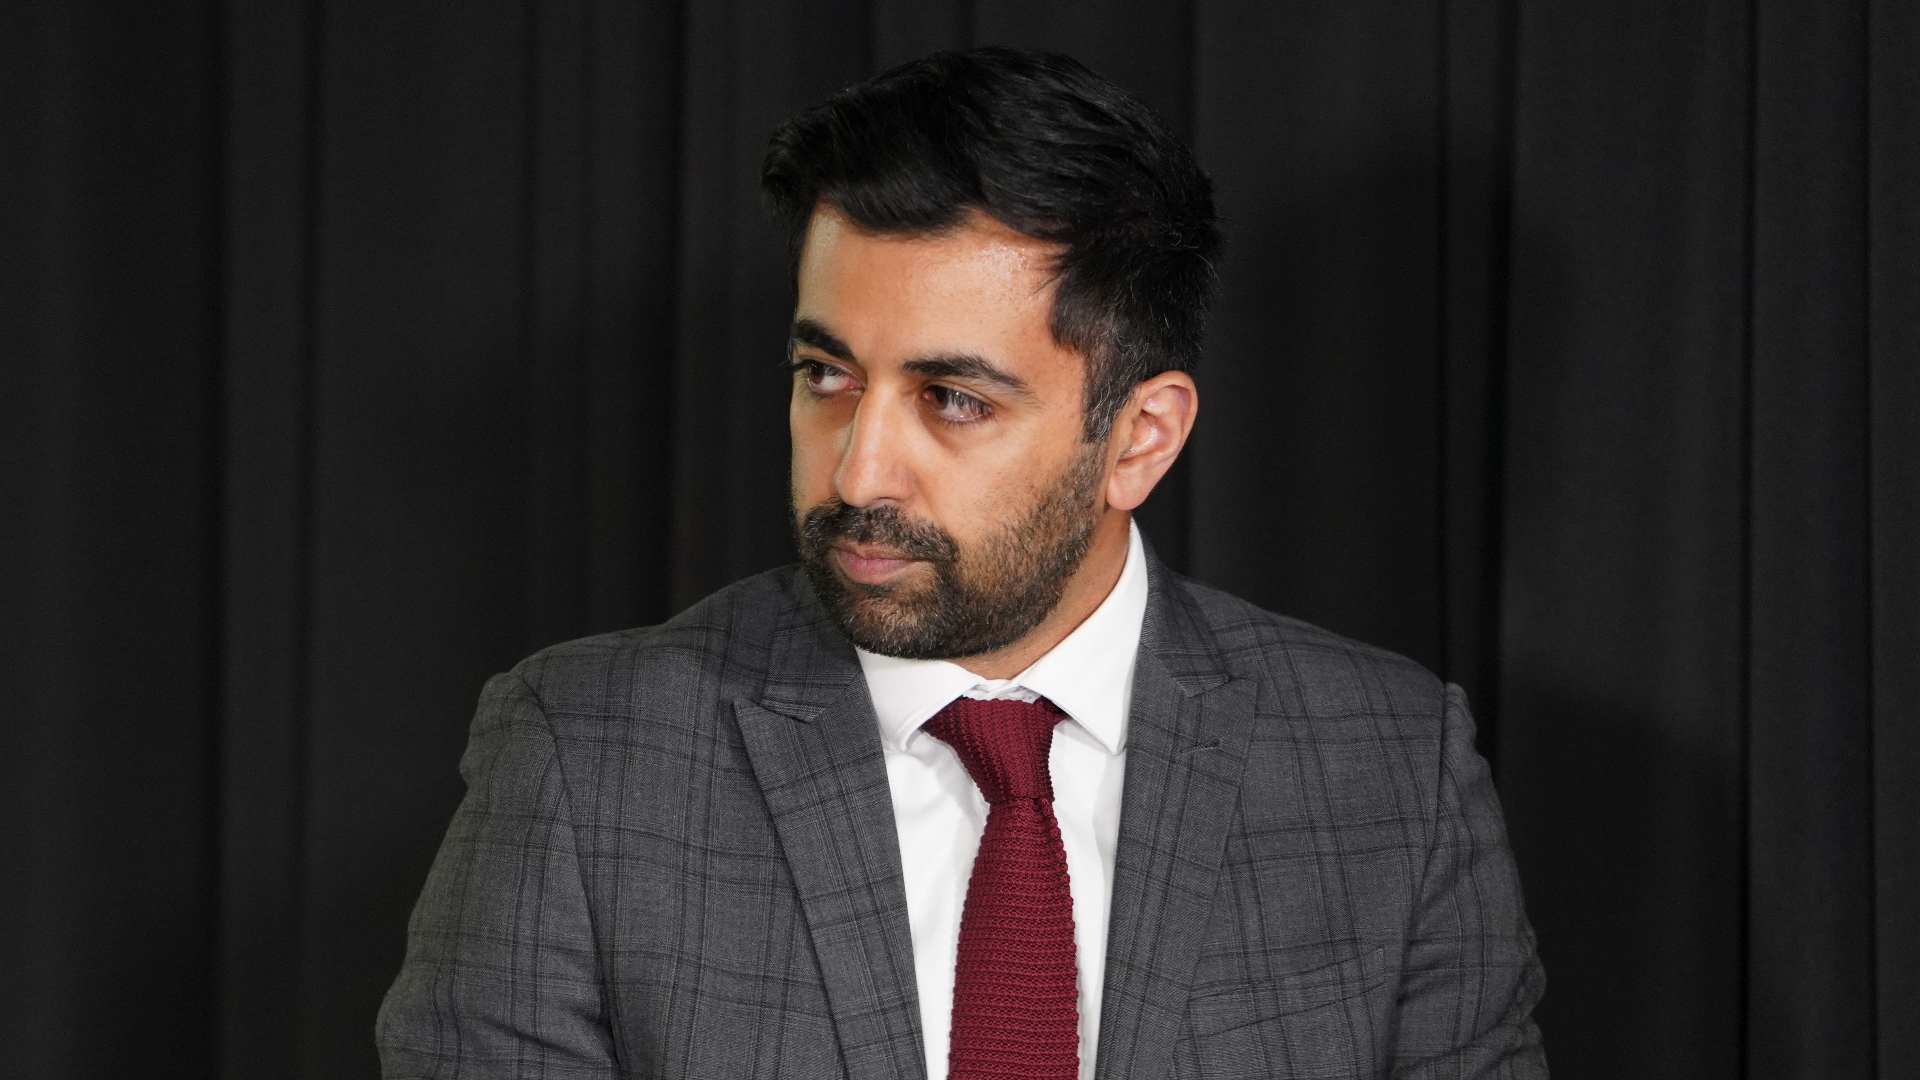 Black has voiced support for Humza Yousaf in SNP leadership bid